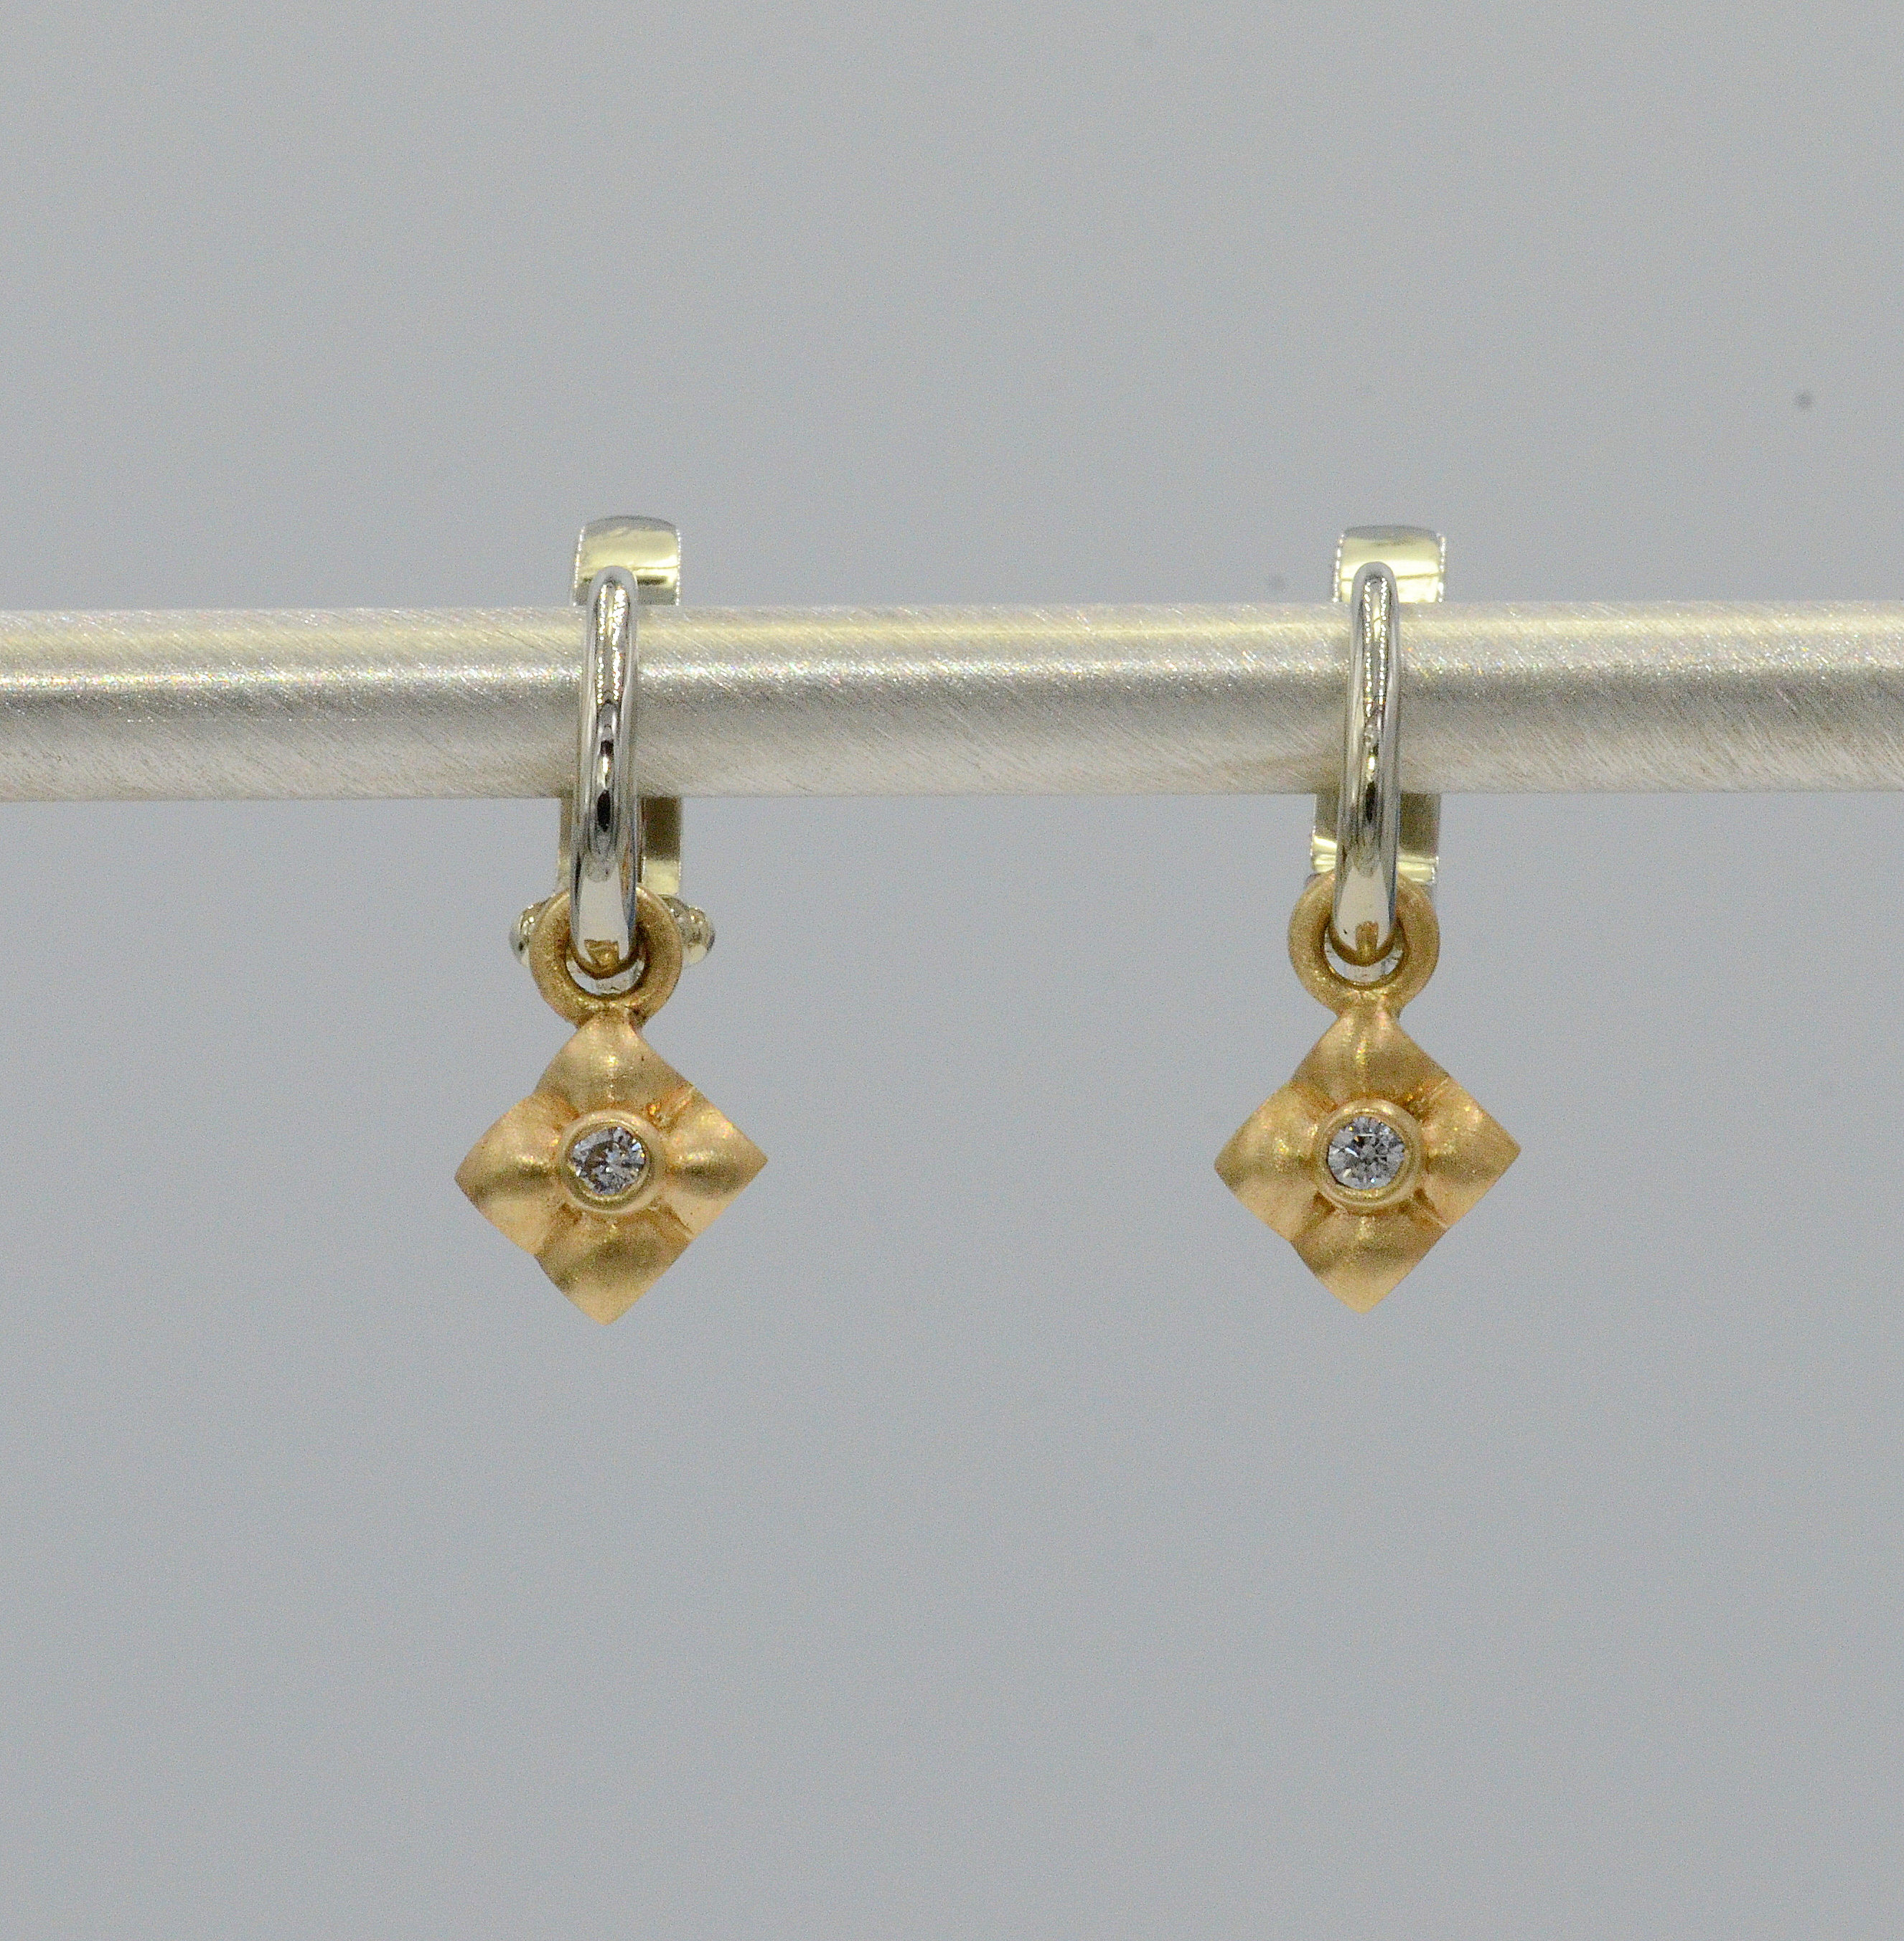 14 karat Diamond Euro Charm Earrings.  These earrings are worn with our Euro Wire Earrings which are sold separately. Go to About page for further description of Euro Wire Earrings.